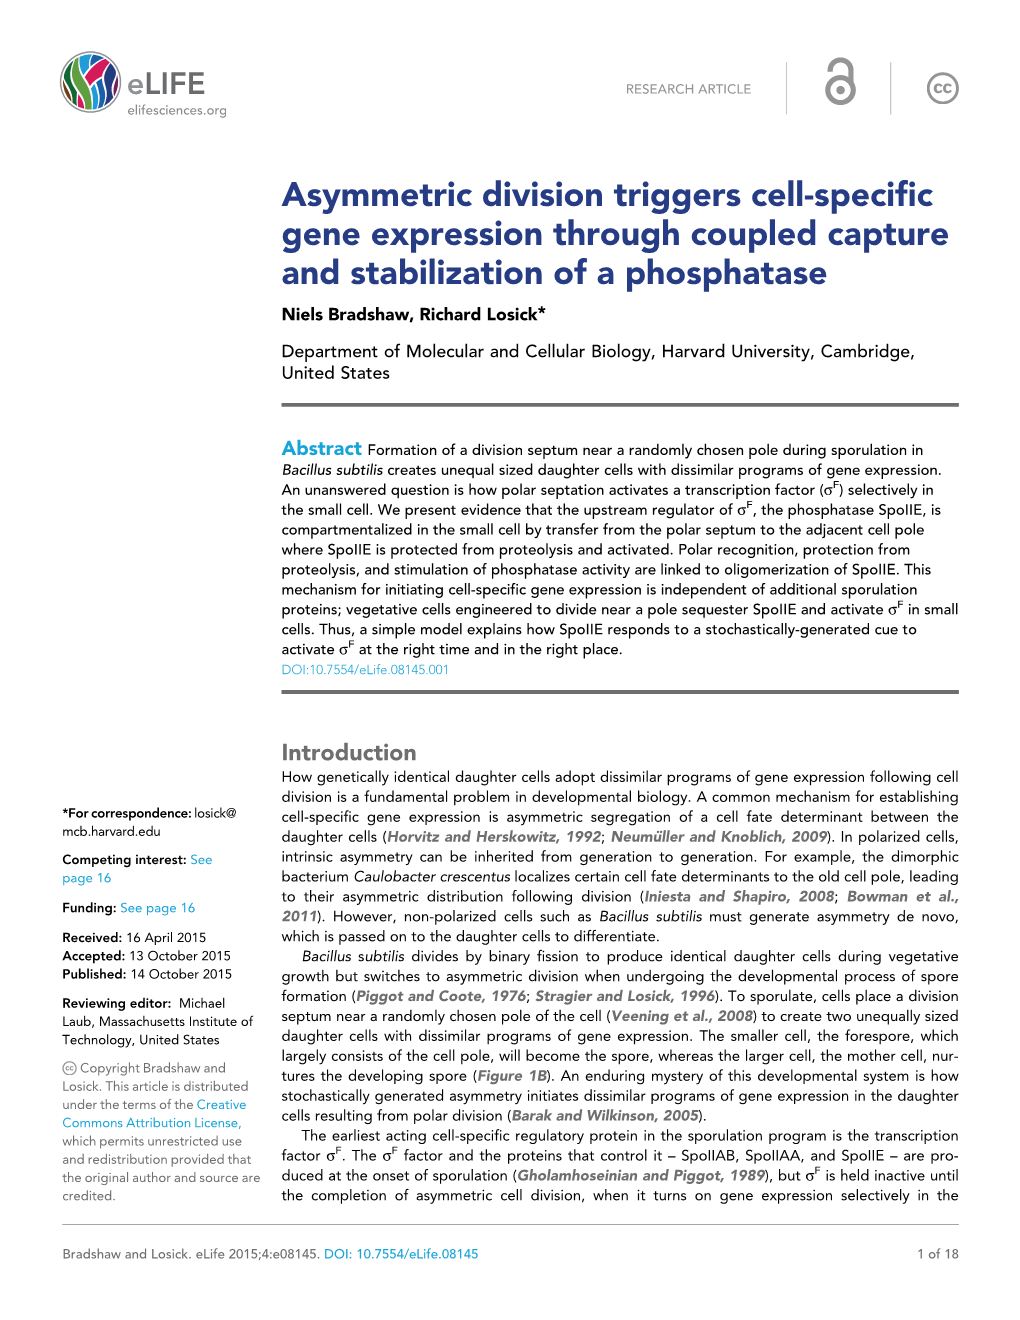 Asymmetric Division Triggers Cell-Specific Gene Expression Through Coupled Capture and Stabilization of a Phosphatase Niels Bradshaw, Richard Losick*